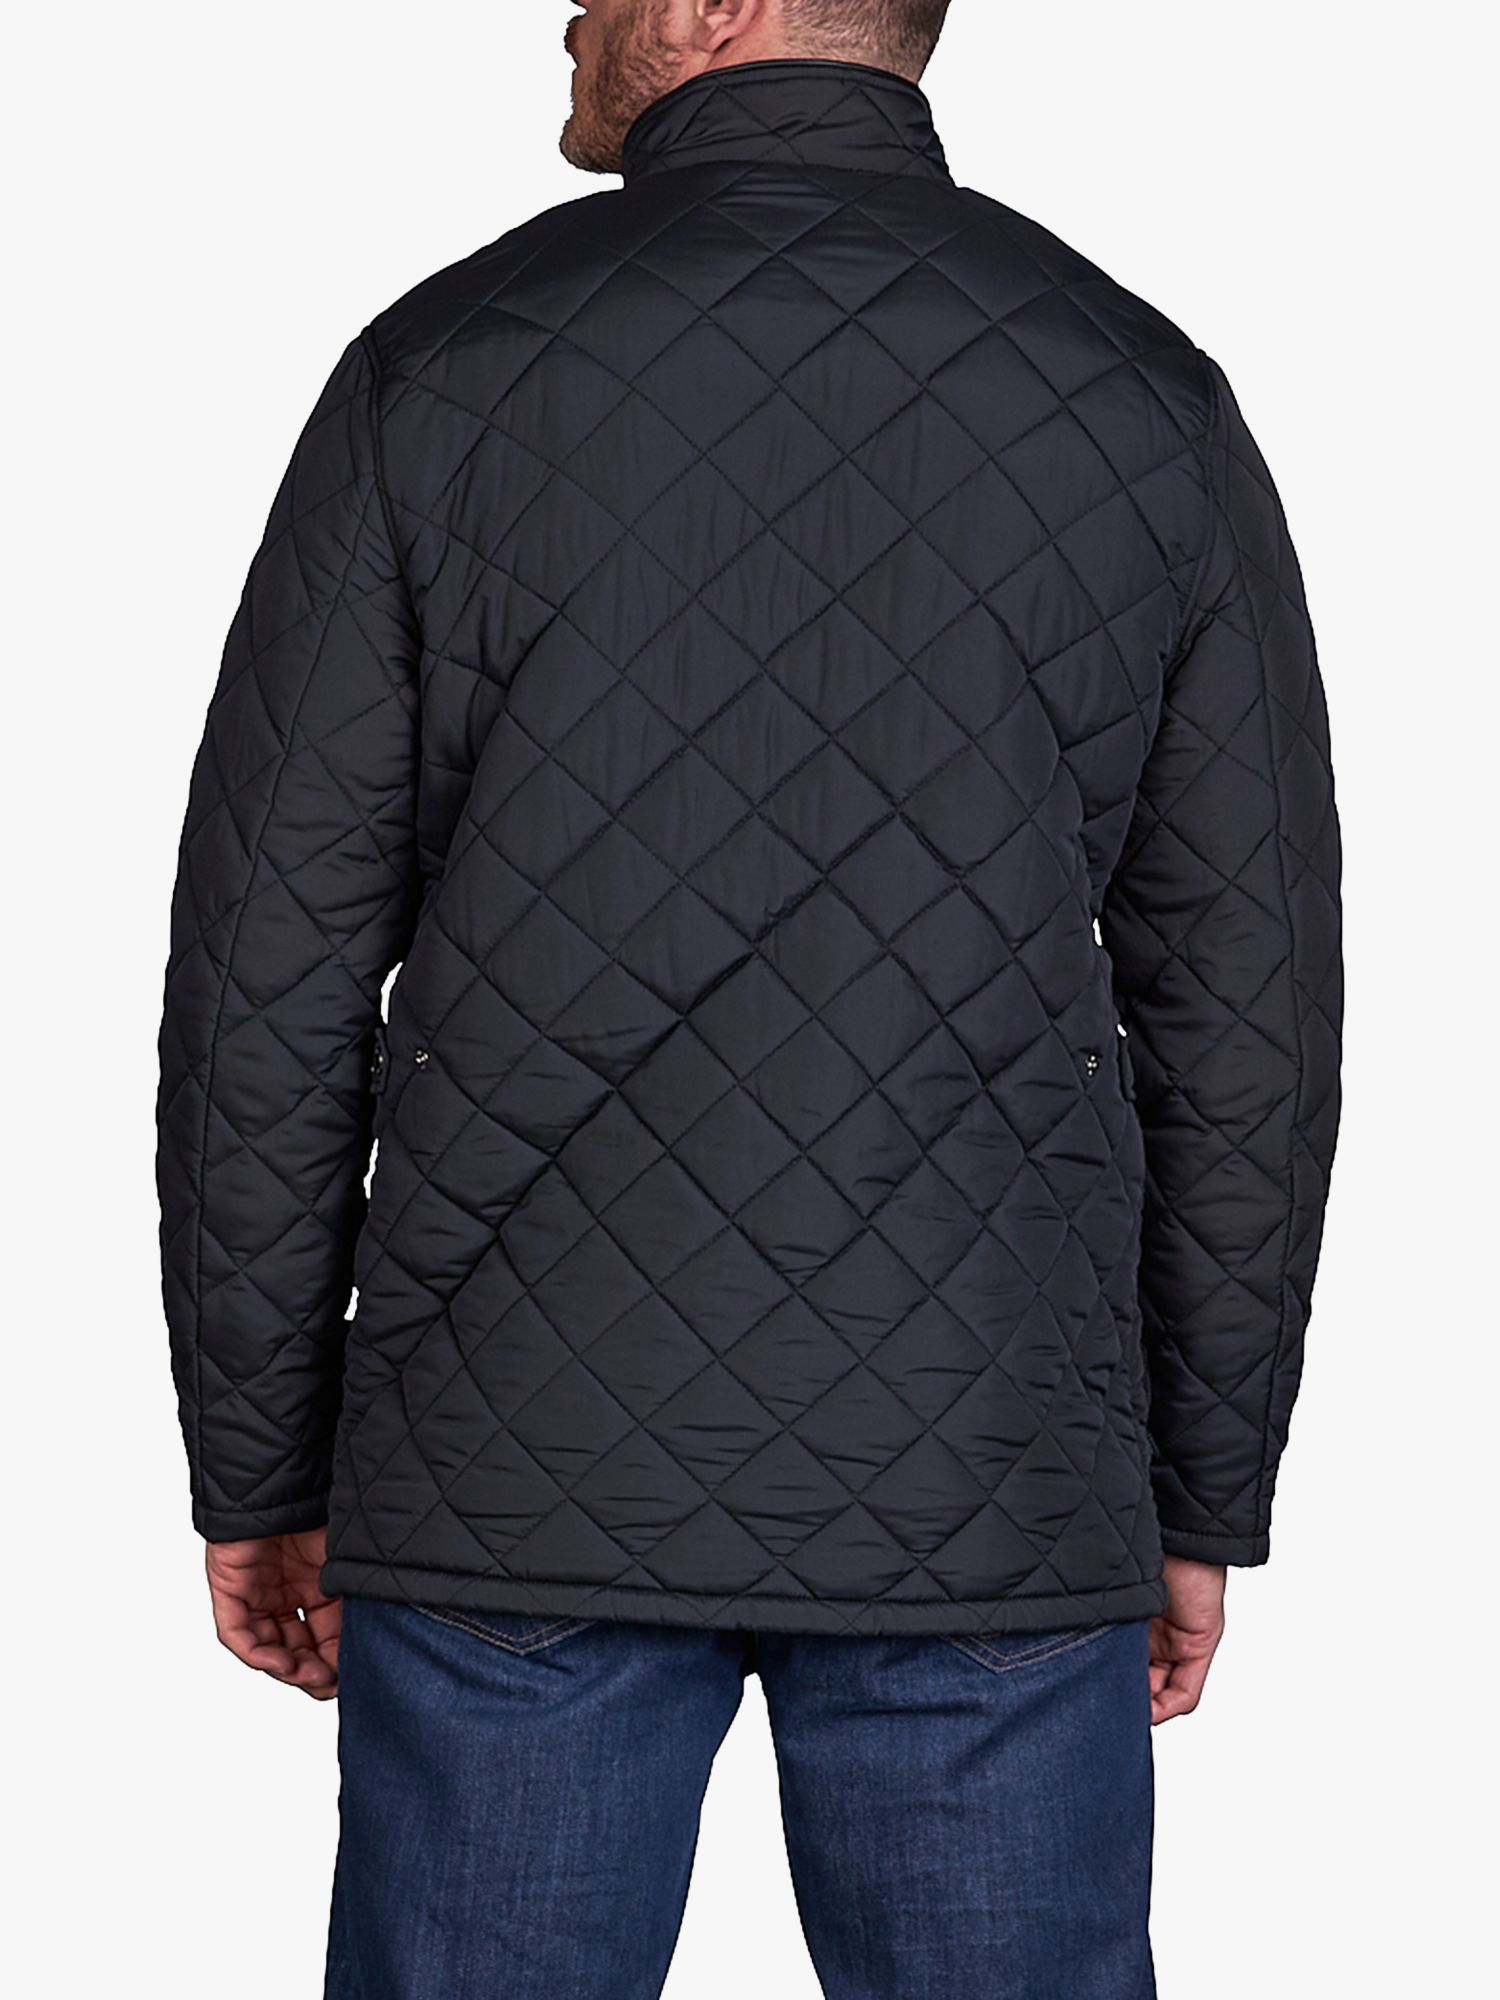 Raging Bull Quilted Field Jacket, Black at John Lewis & Partners